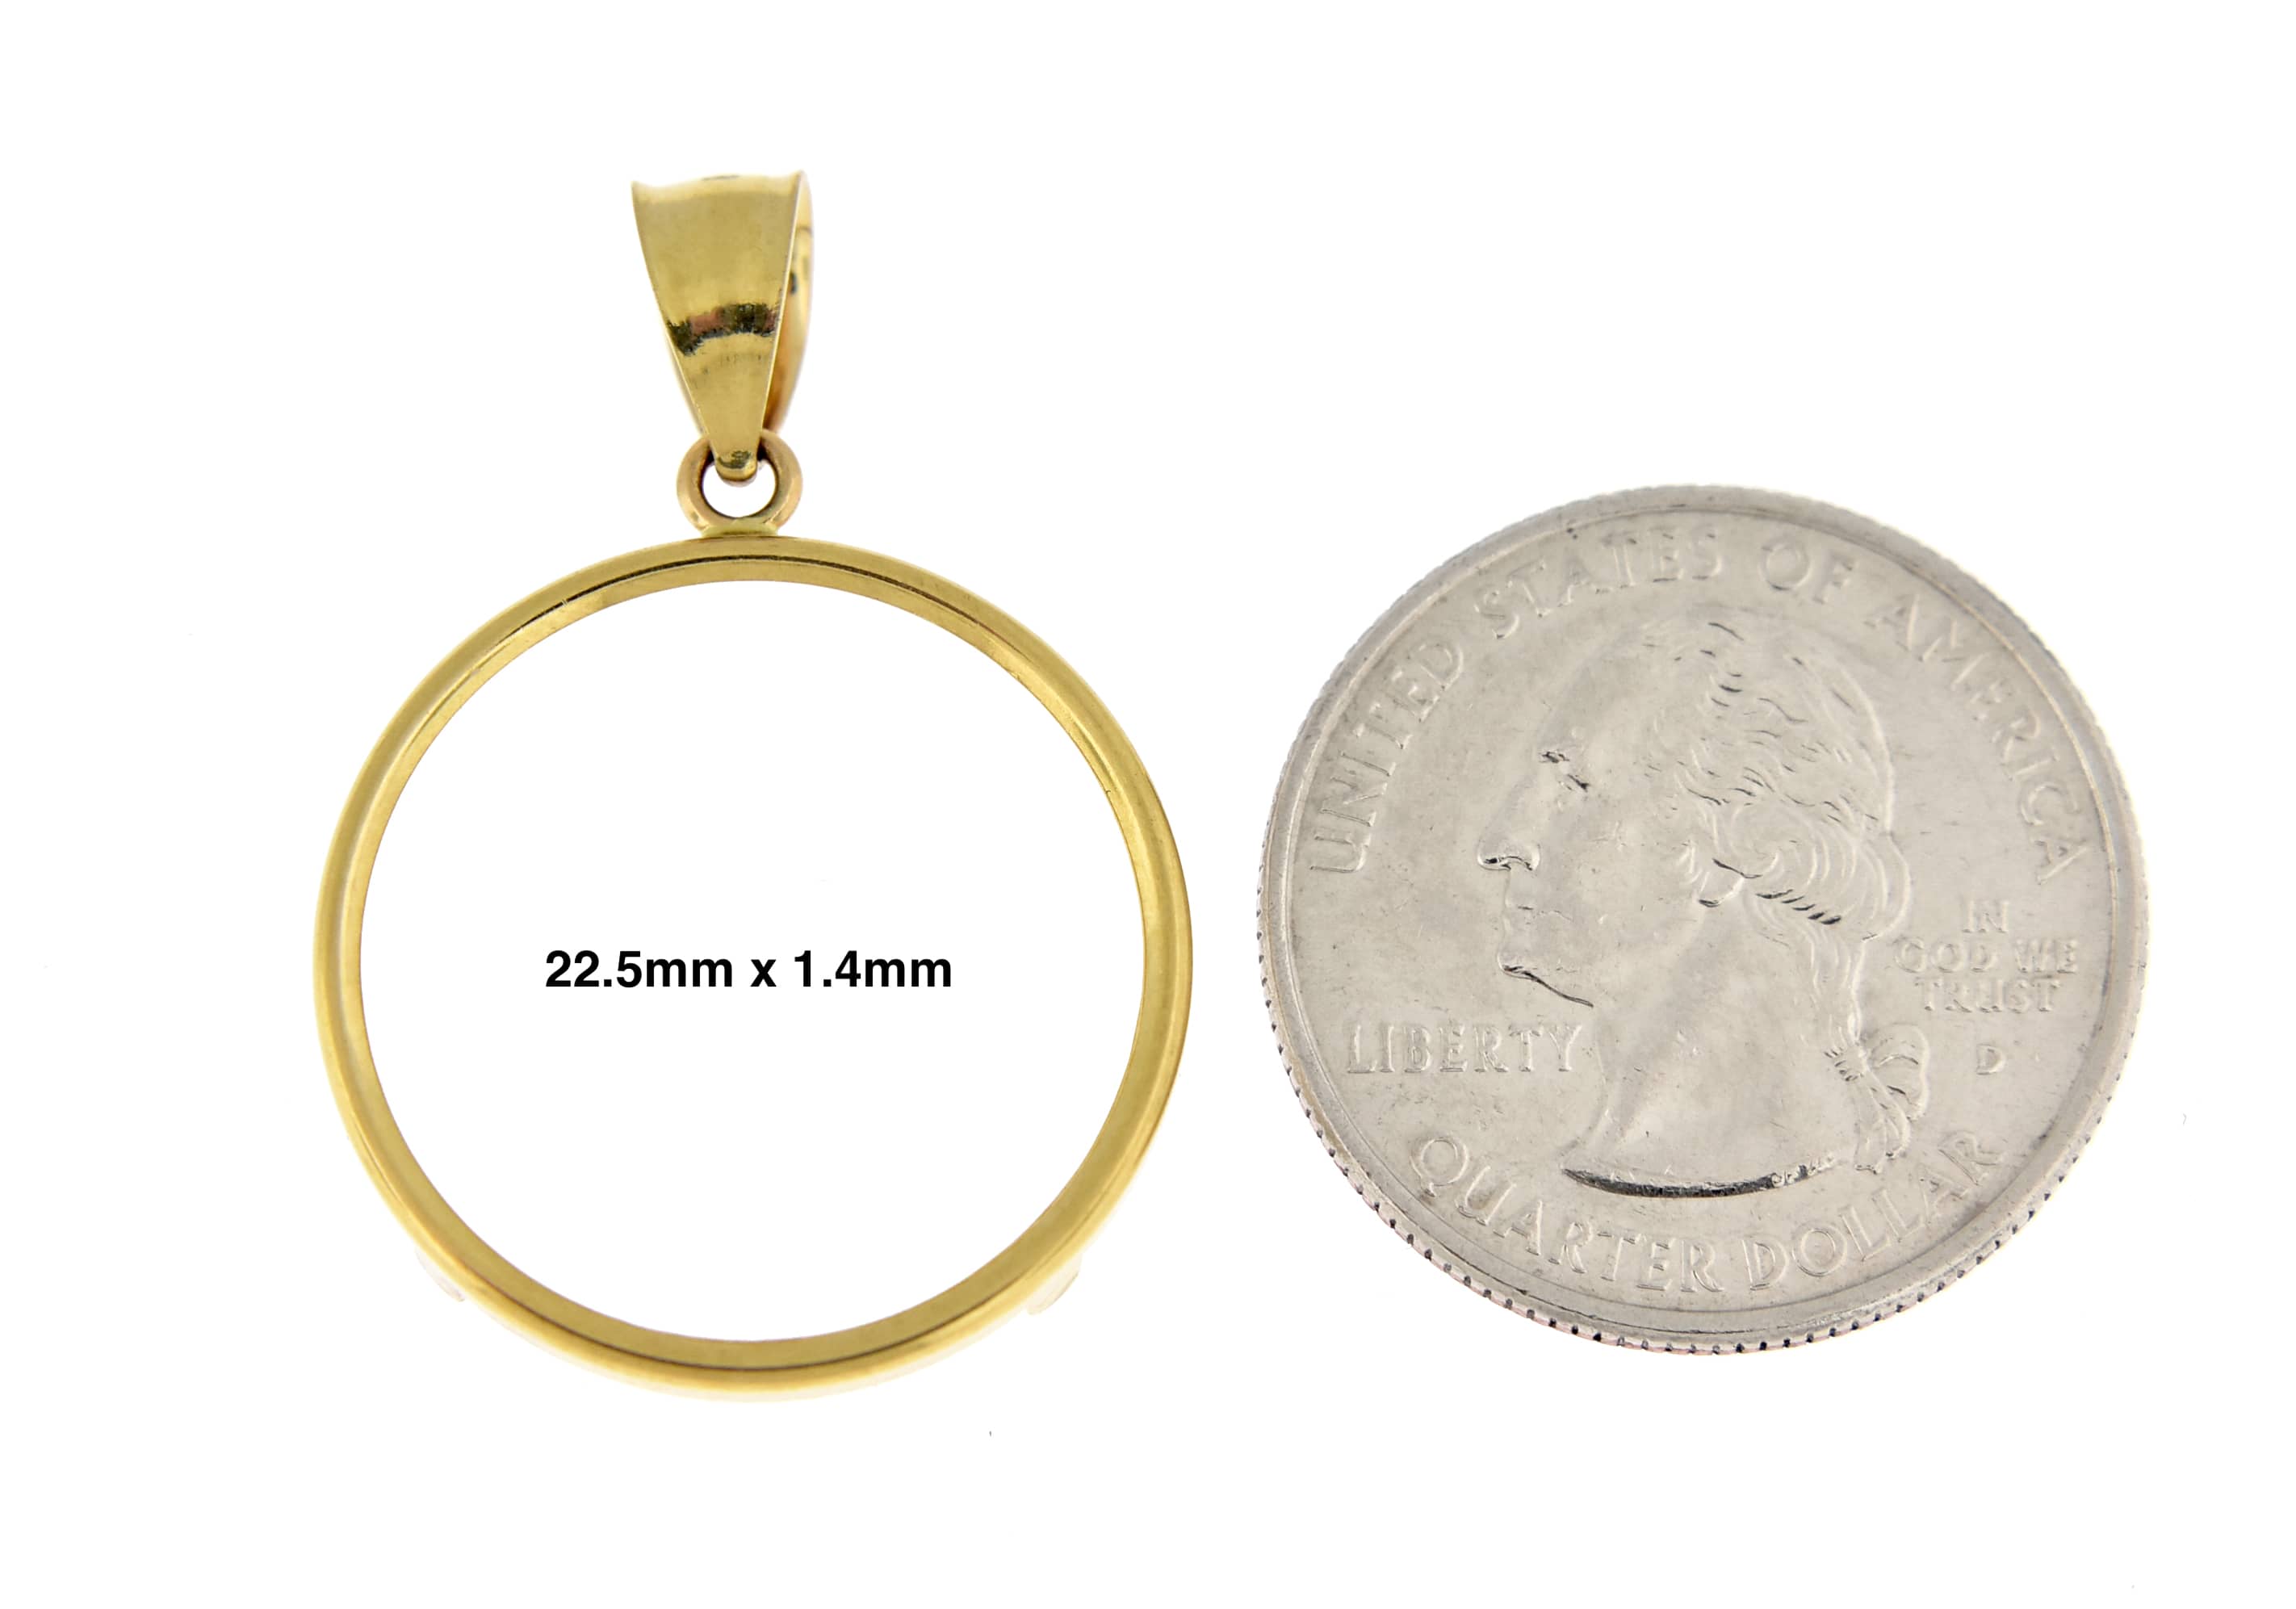 14K Yellow Gold Coin Holder Pendant Charm for 22.5mm x 1.4mm Coins or Mexican 10 Peso or Mexican 1/4 Ounce Coin Tab Back Frame